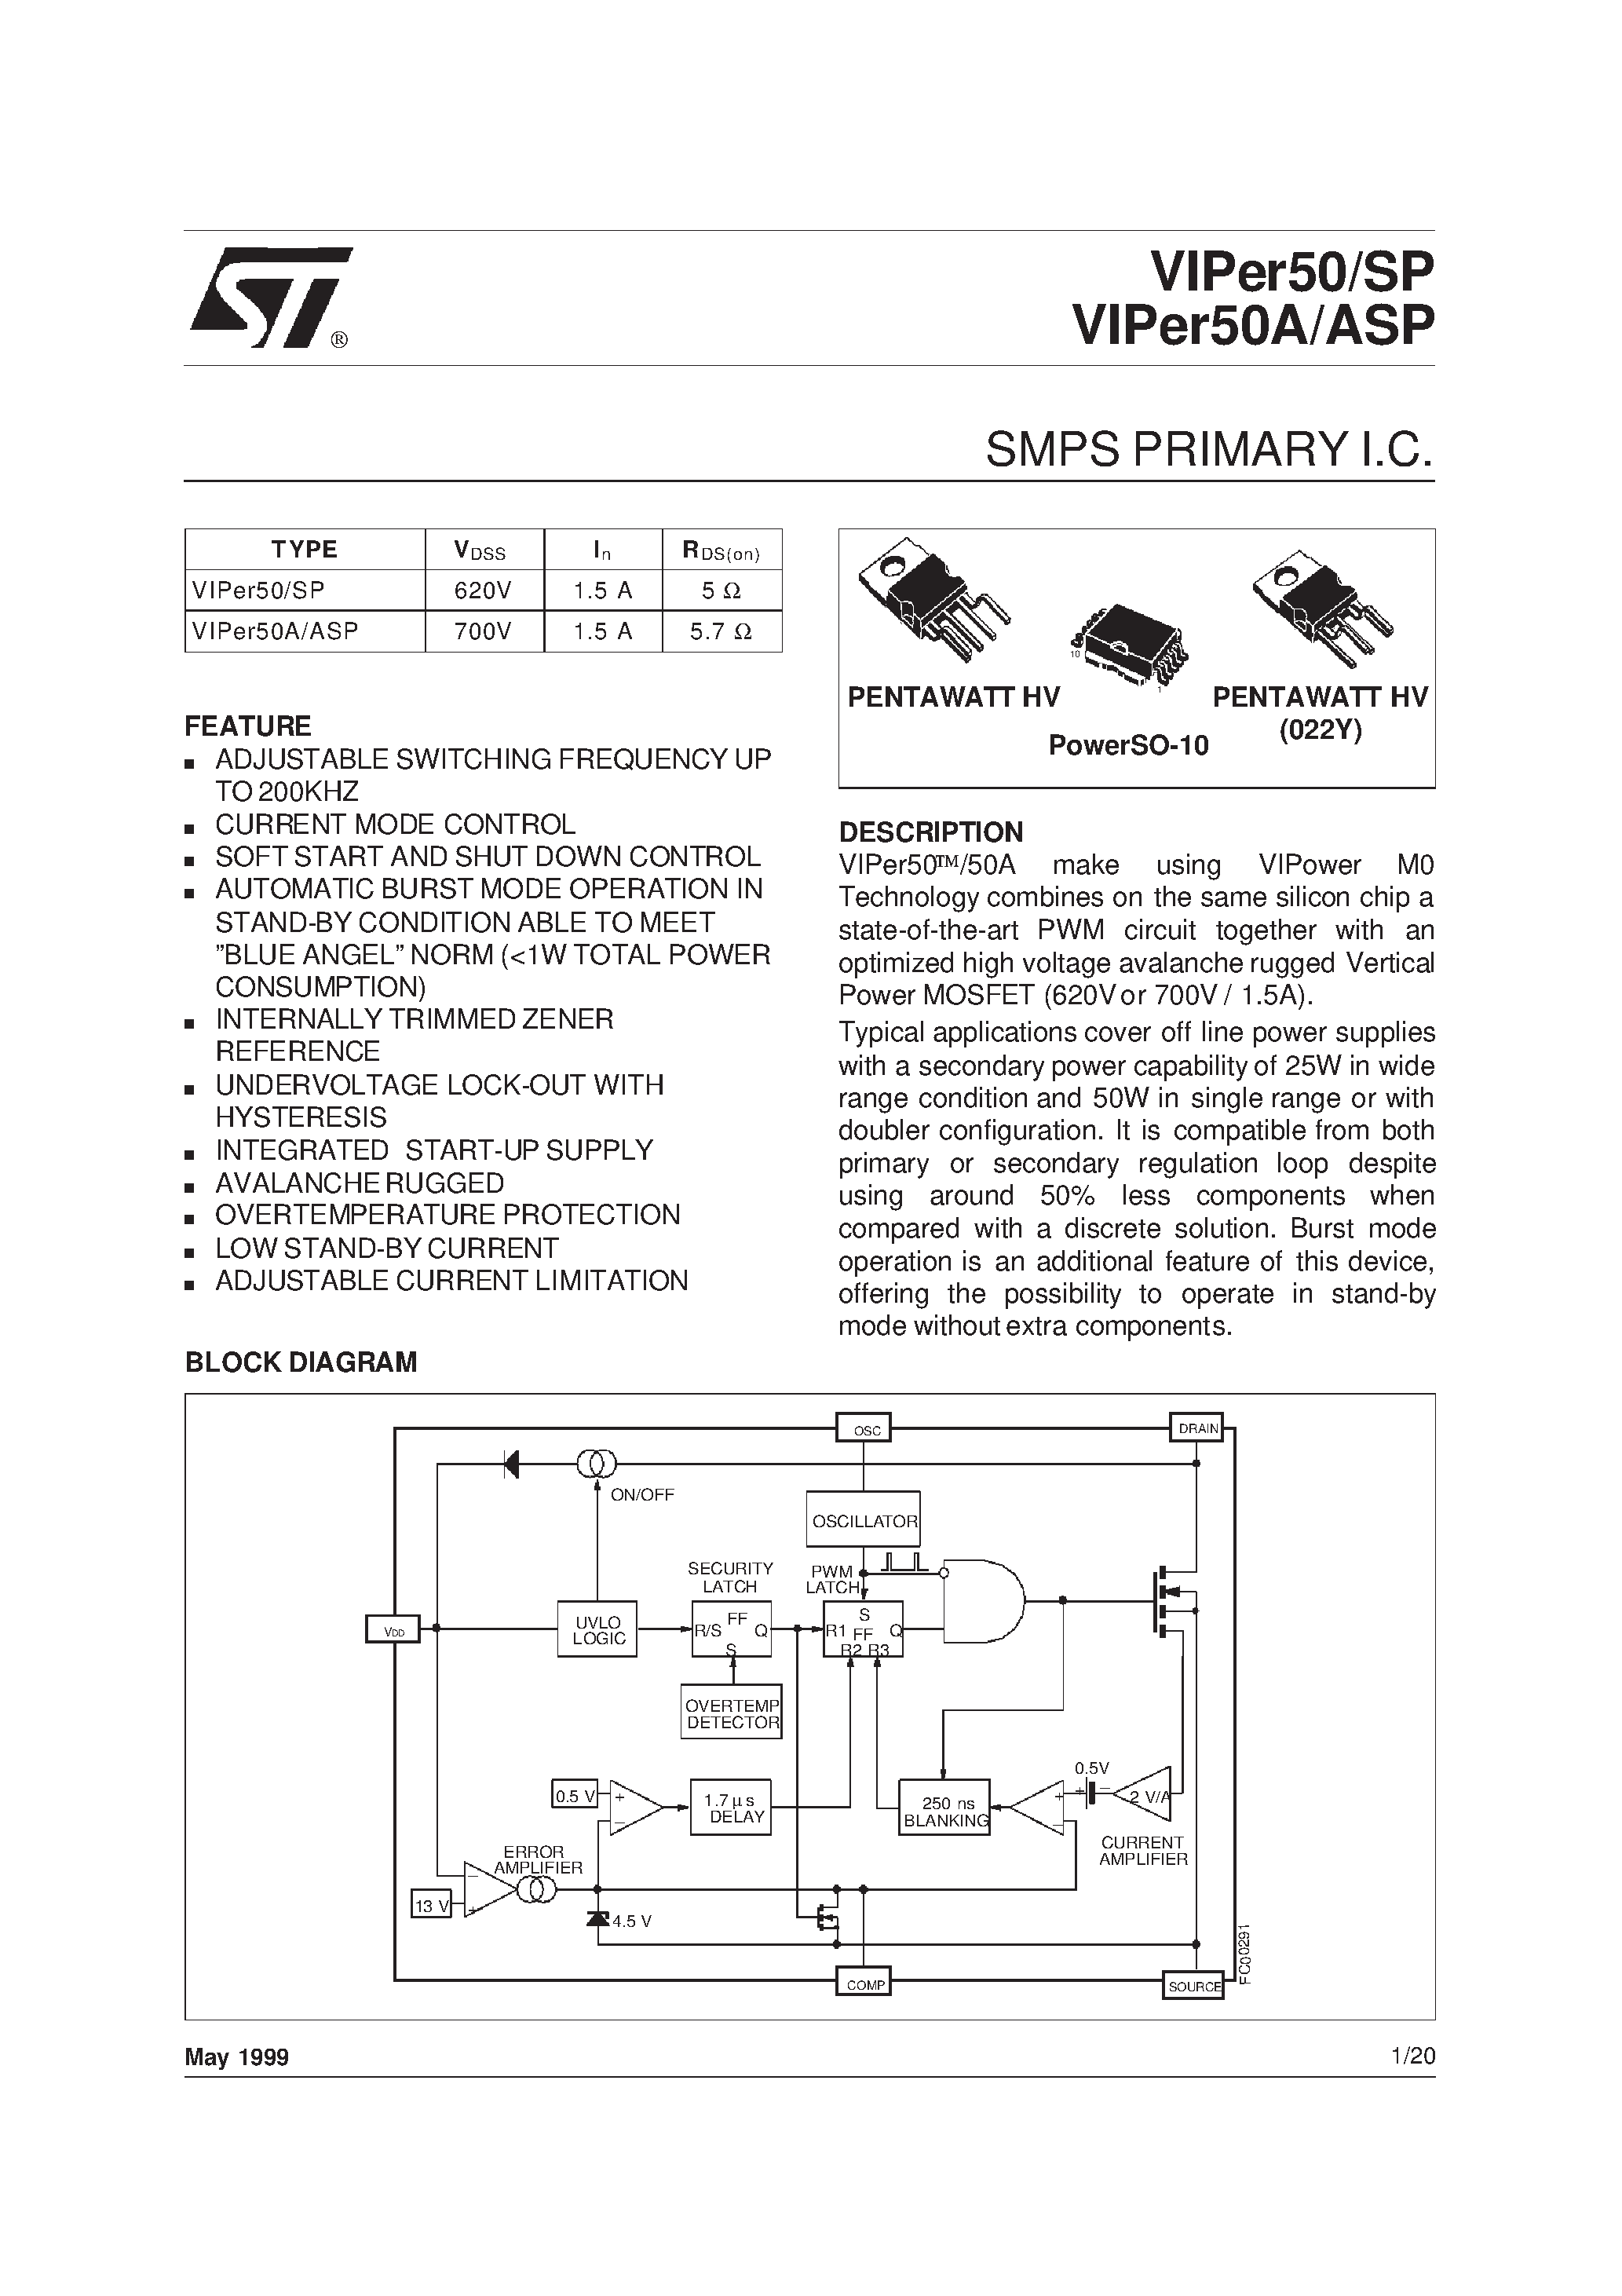 Datasheet VIPER50 - SMPS PRIMARY I.C. page 1